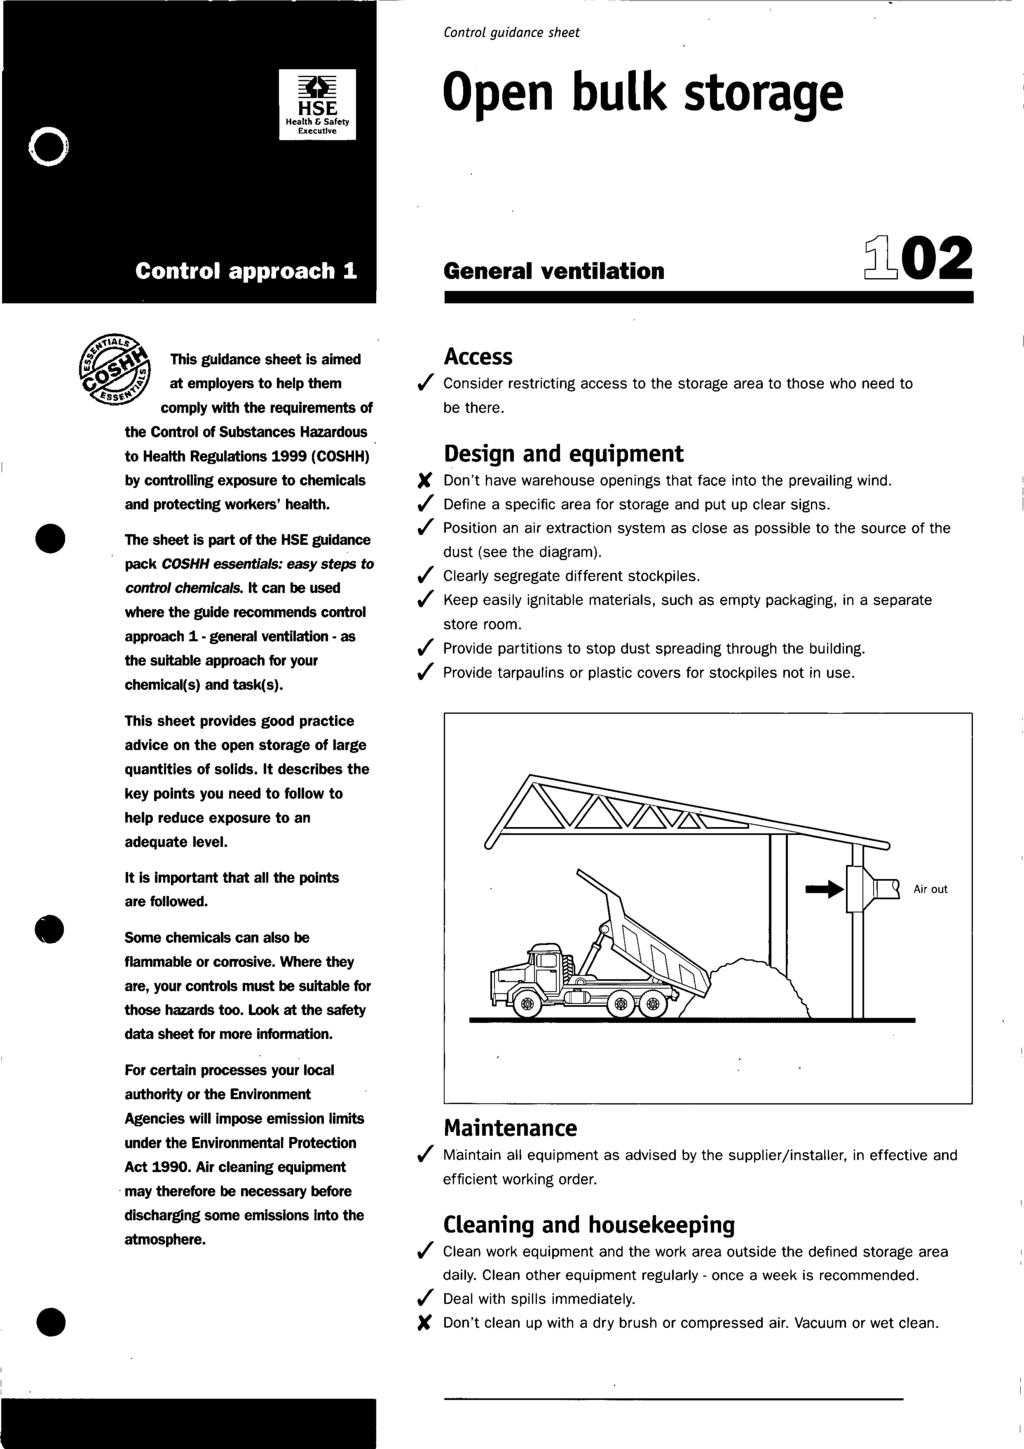 Control guidance sheet Open bulk storage General ventilation a02 This guidance sheet is aimed at employers to help them comply with the requirements of the Control of Substances Hazardous to Health